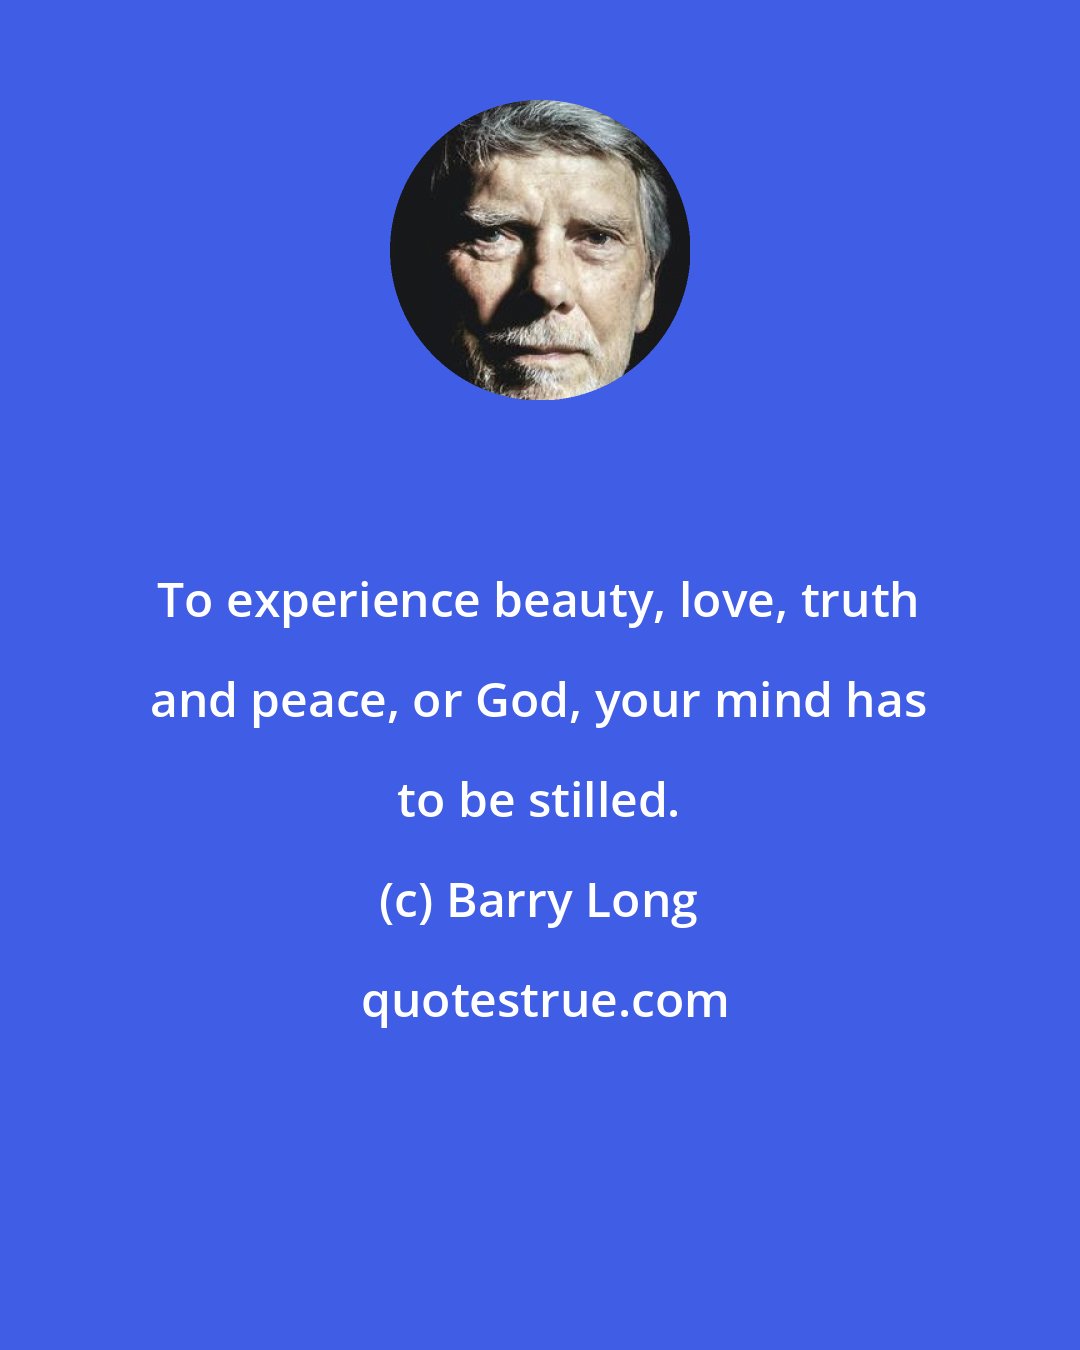 Barry Long: To experience beauty, love, truth and peace, or God, your mind has to be stilled.